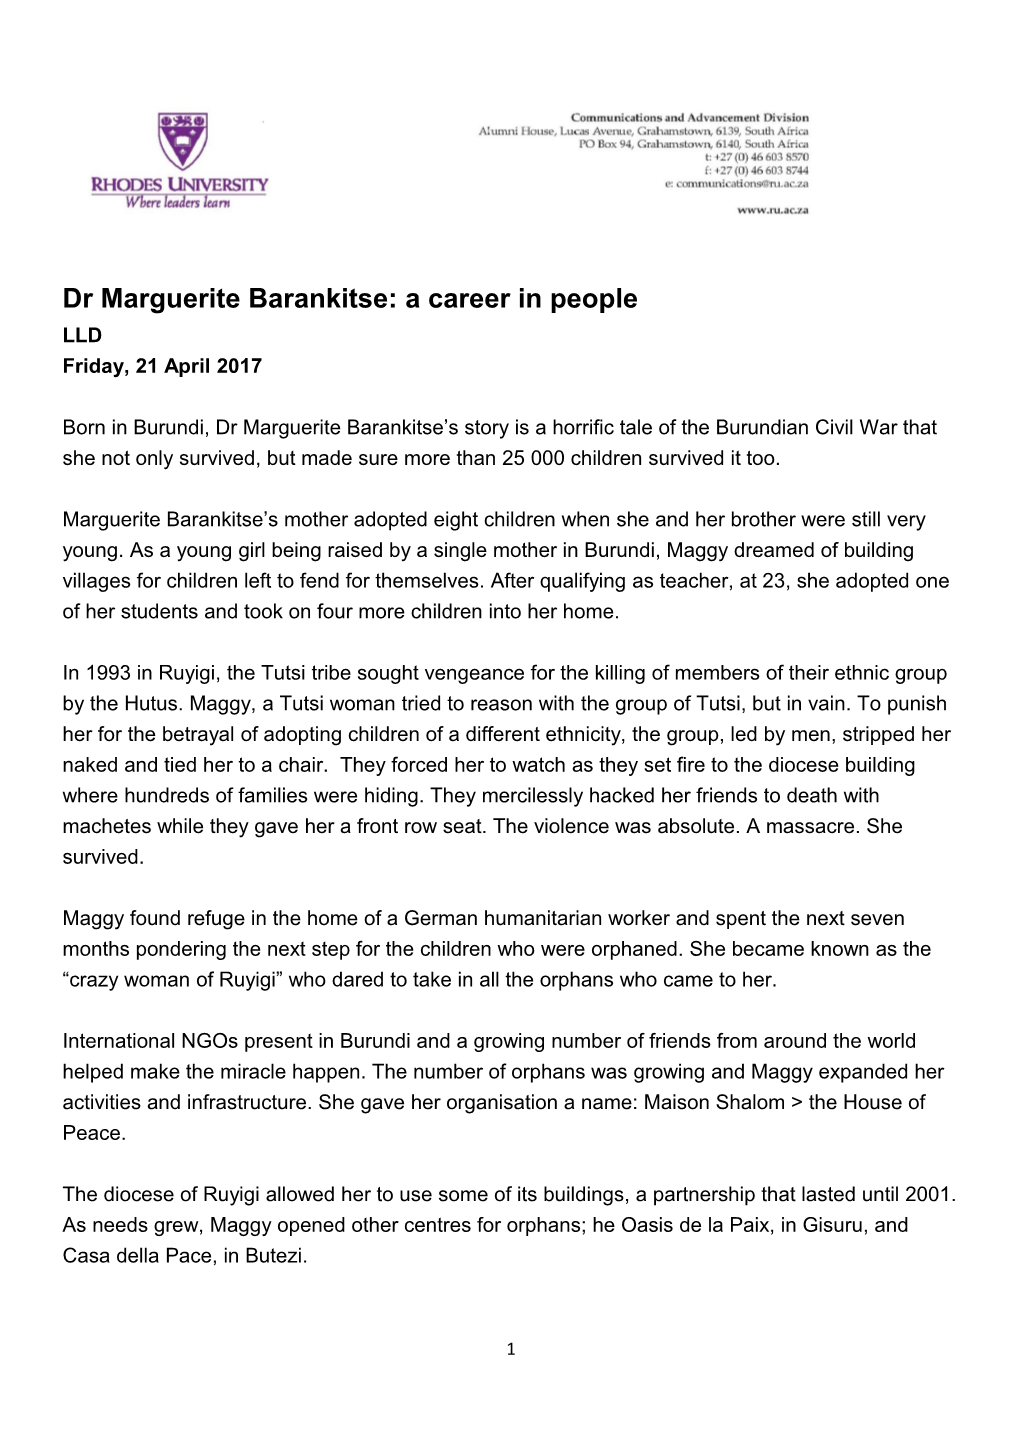 Dr Marguerite Barankitse: a Career in People